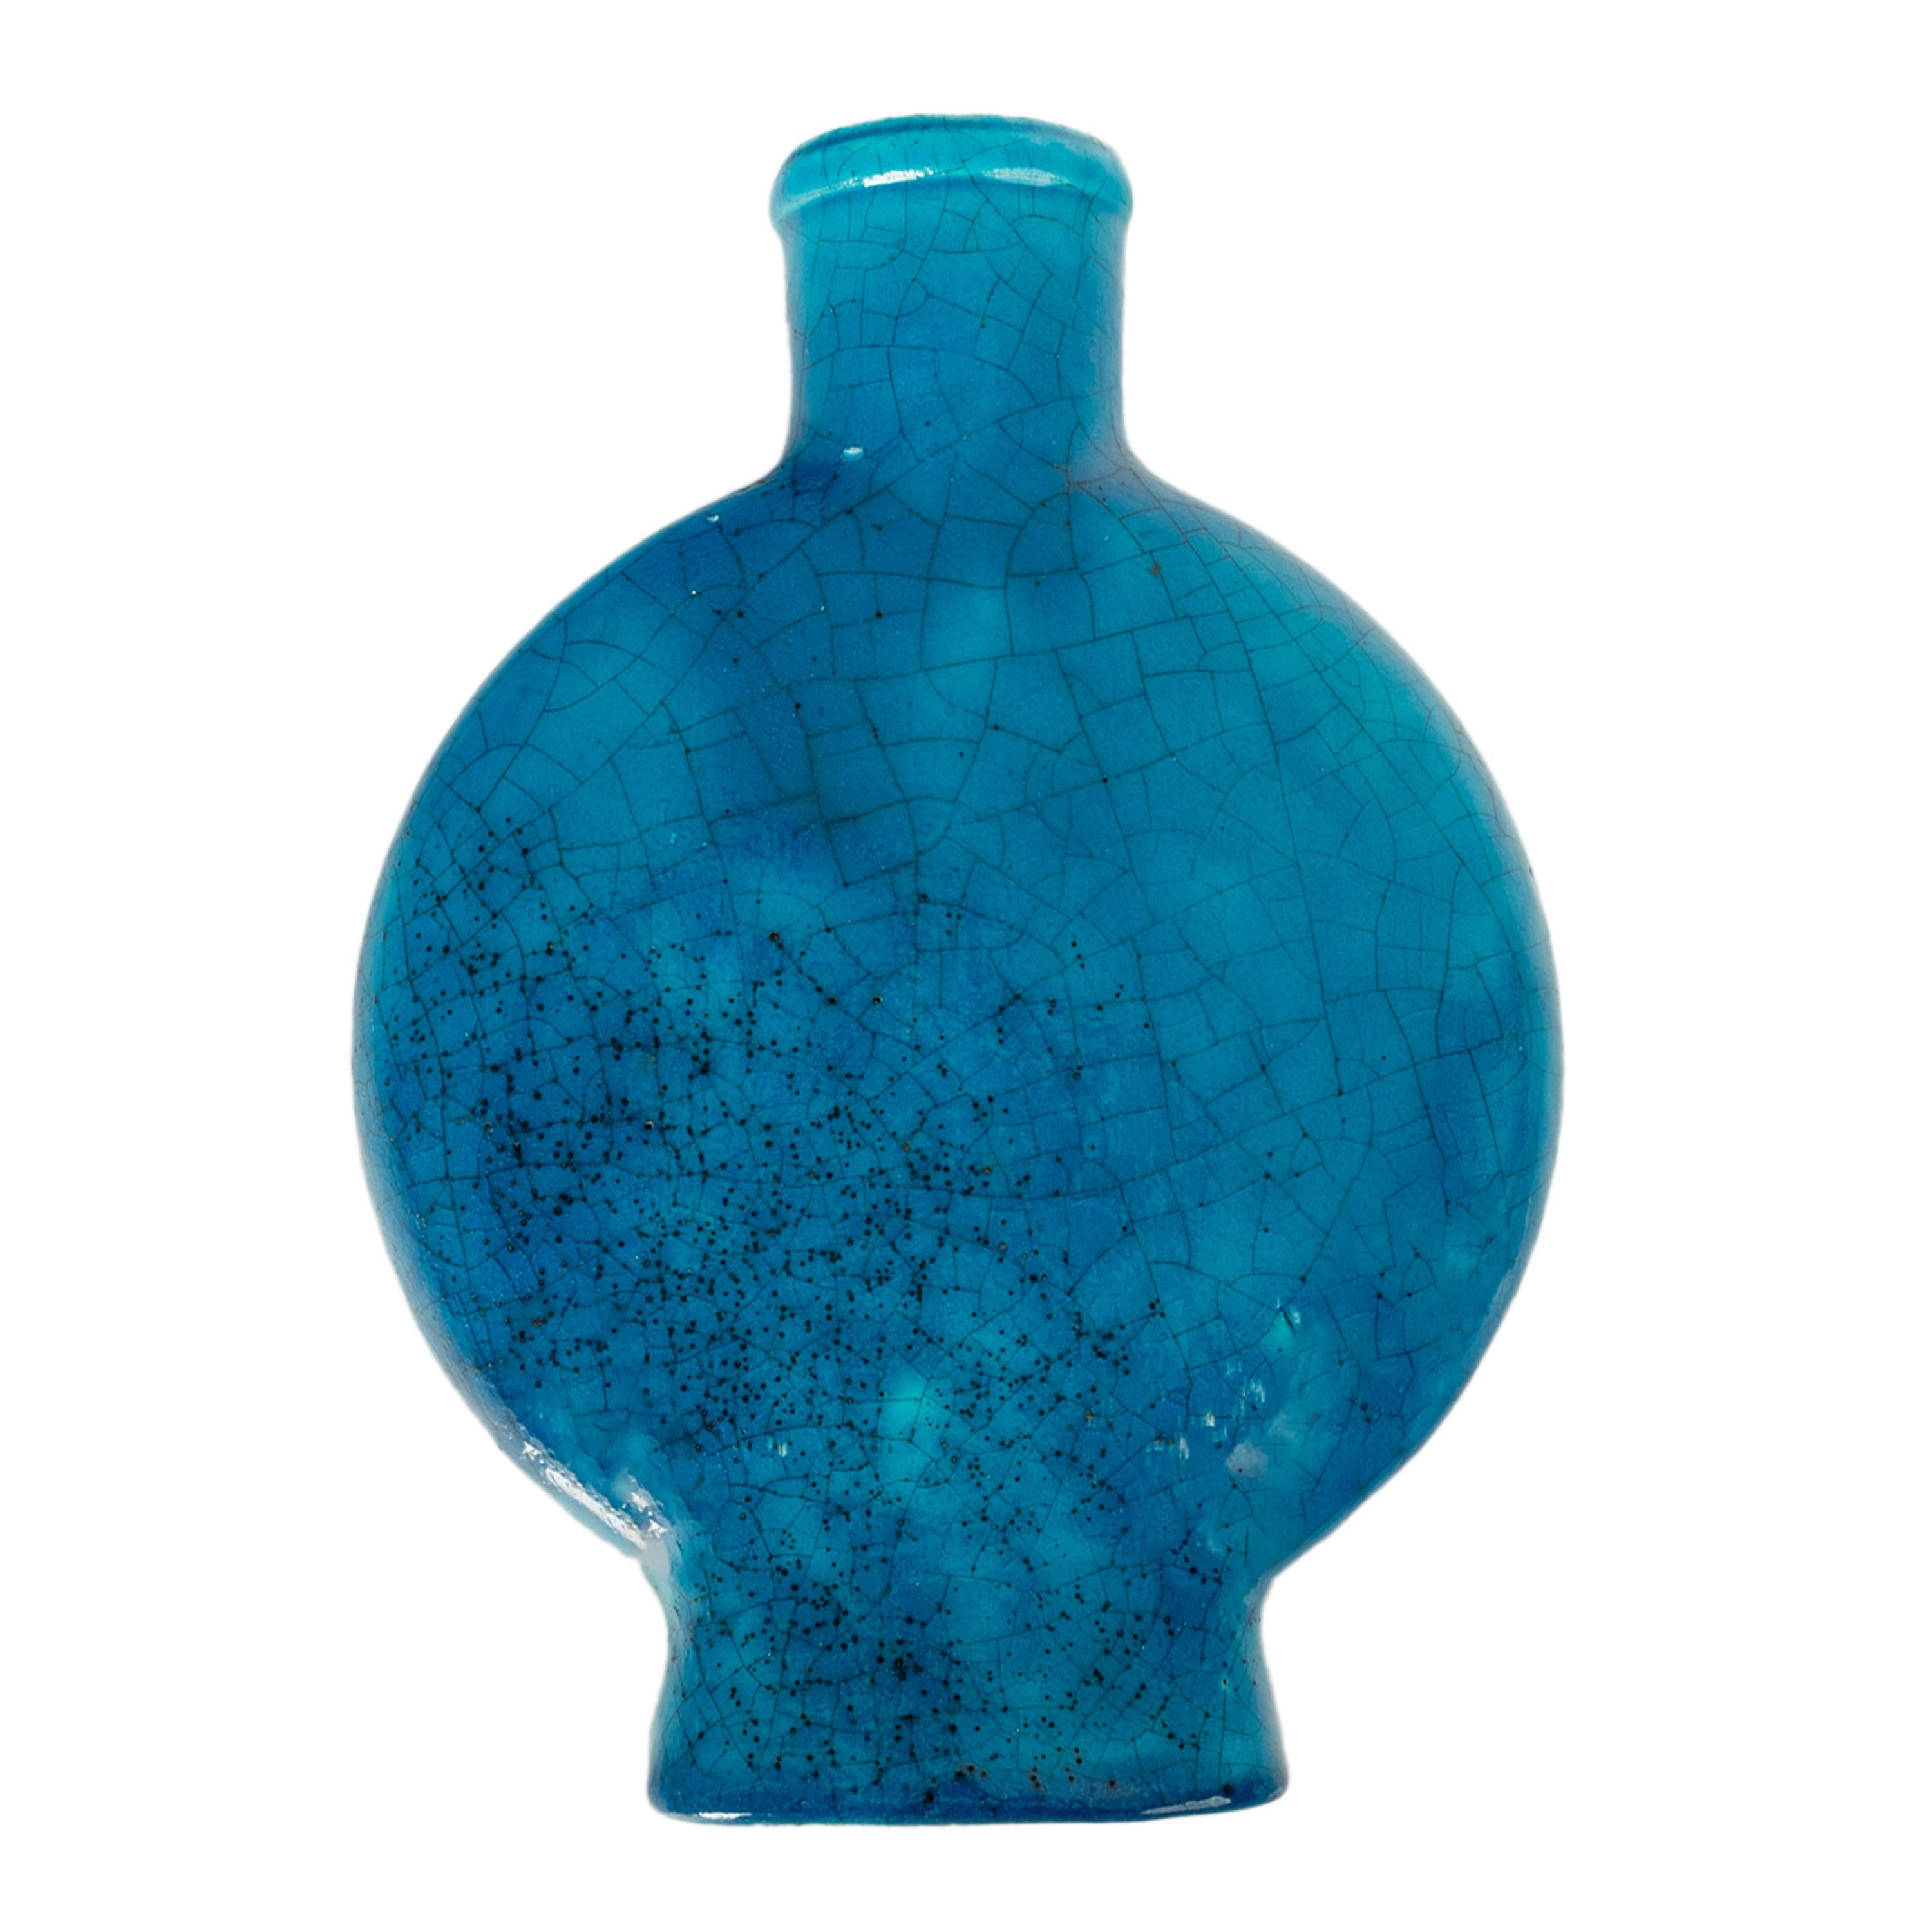 Edmond Lachenal (1855-1948), a wonderful Art Deco turquoise blue volcanic glazed ceramic vase, circa 1930, in wonderful antique condition. Edmond Lachenal was considered an innovator and a pivotal figure in the Art Nouveau Ceramic Art Circle. In